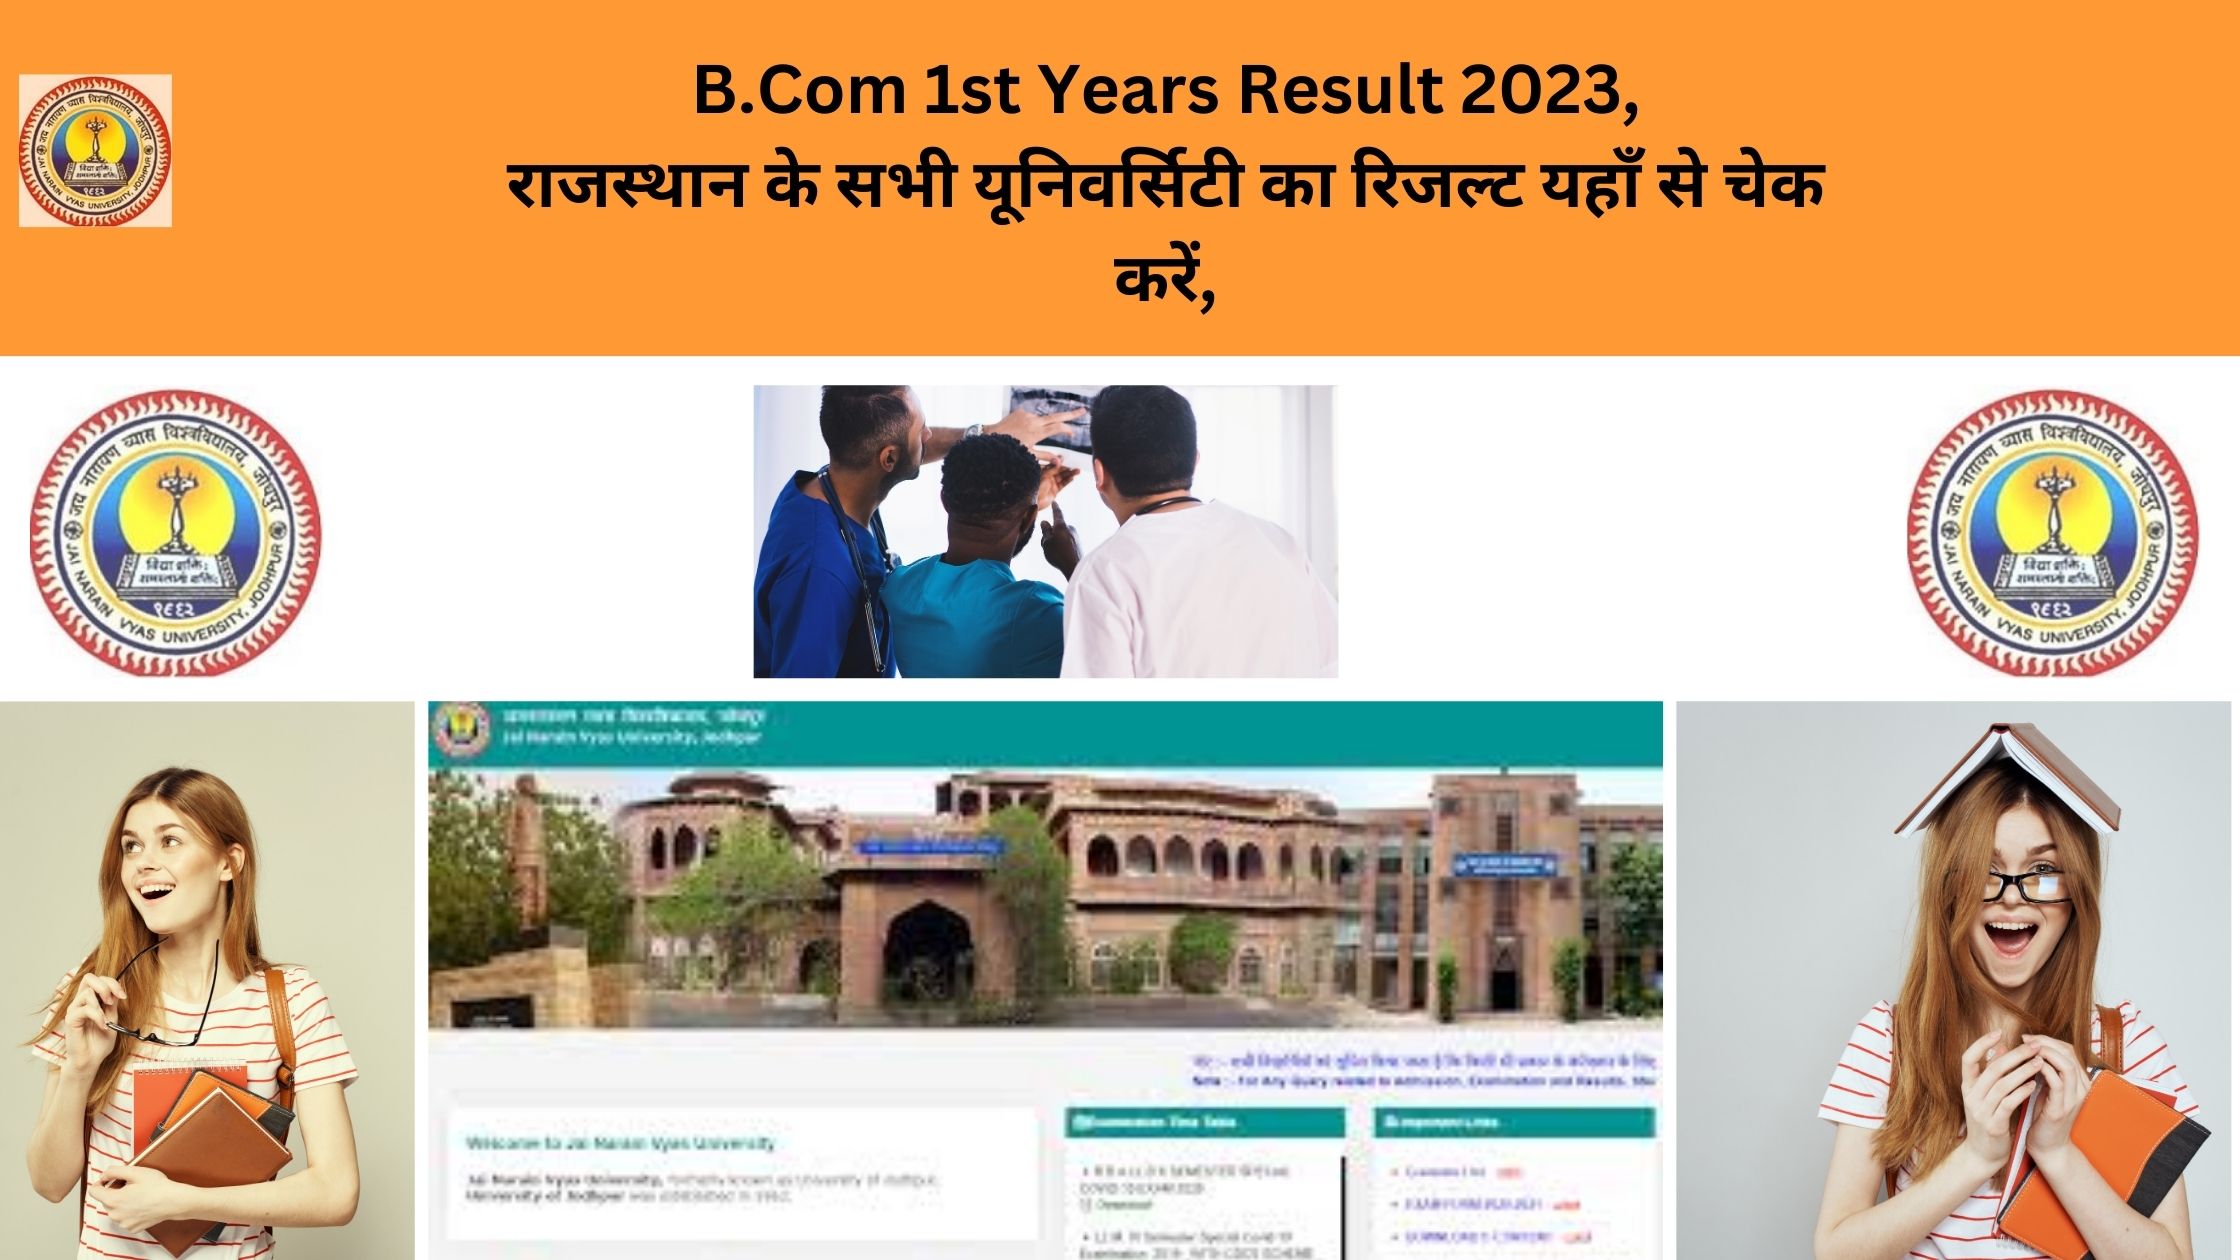 B.Com 1st Years Result 2023 Chek Now